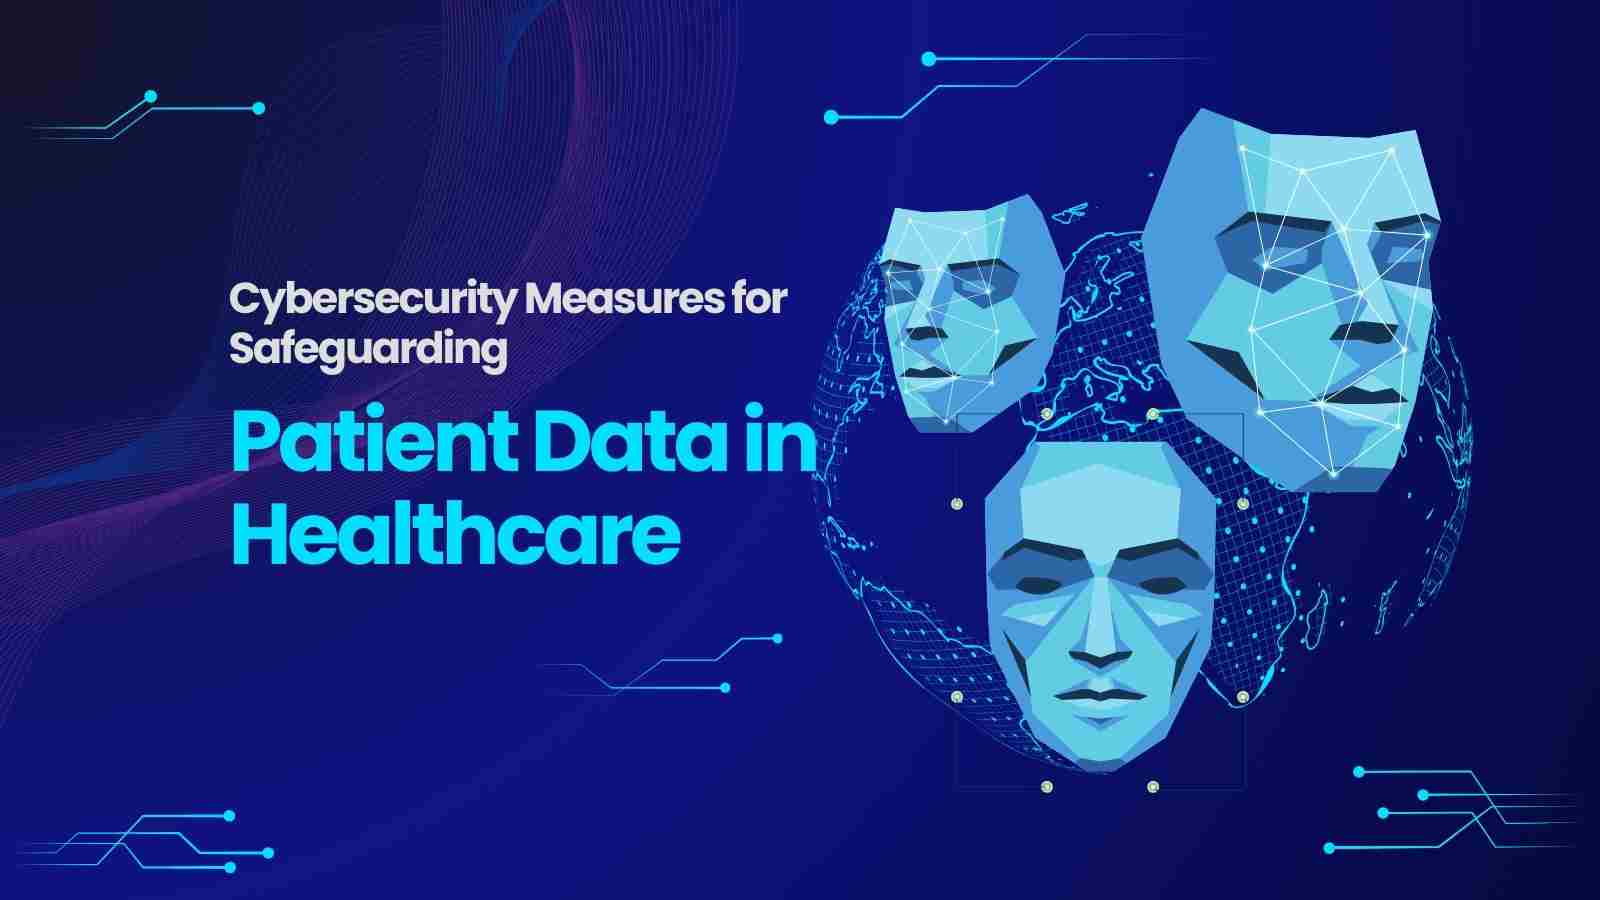 Cybersecurity Measures for Safeguarding Patient Data in Healthcare